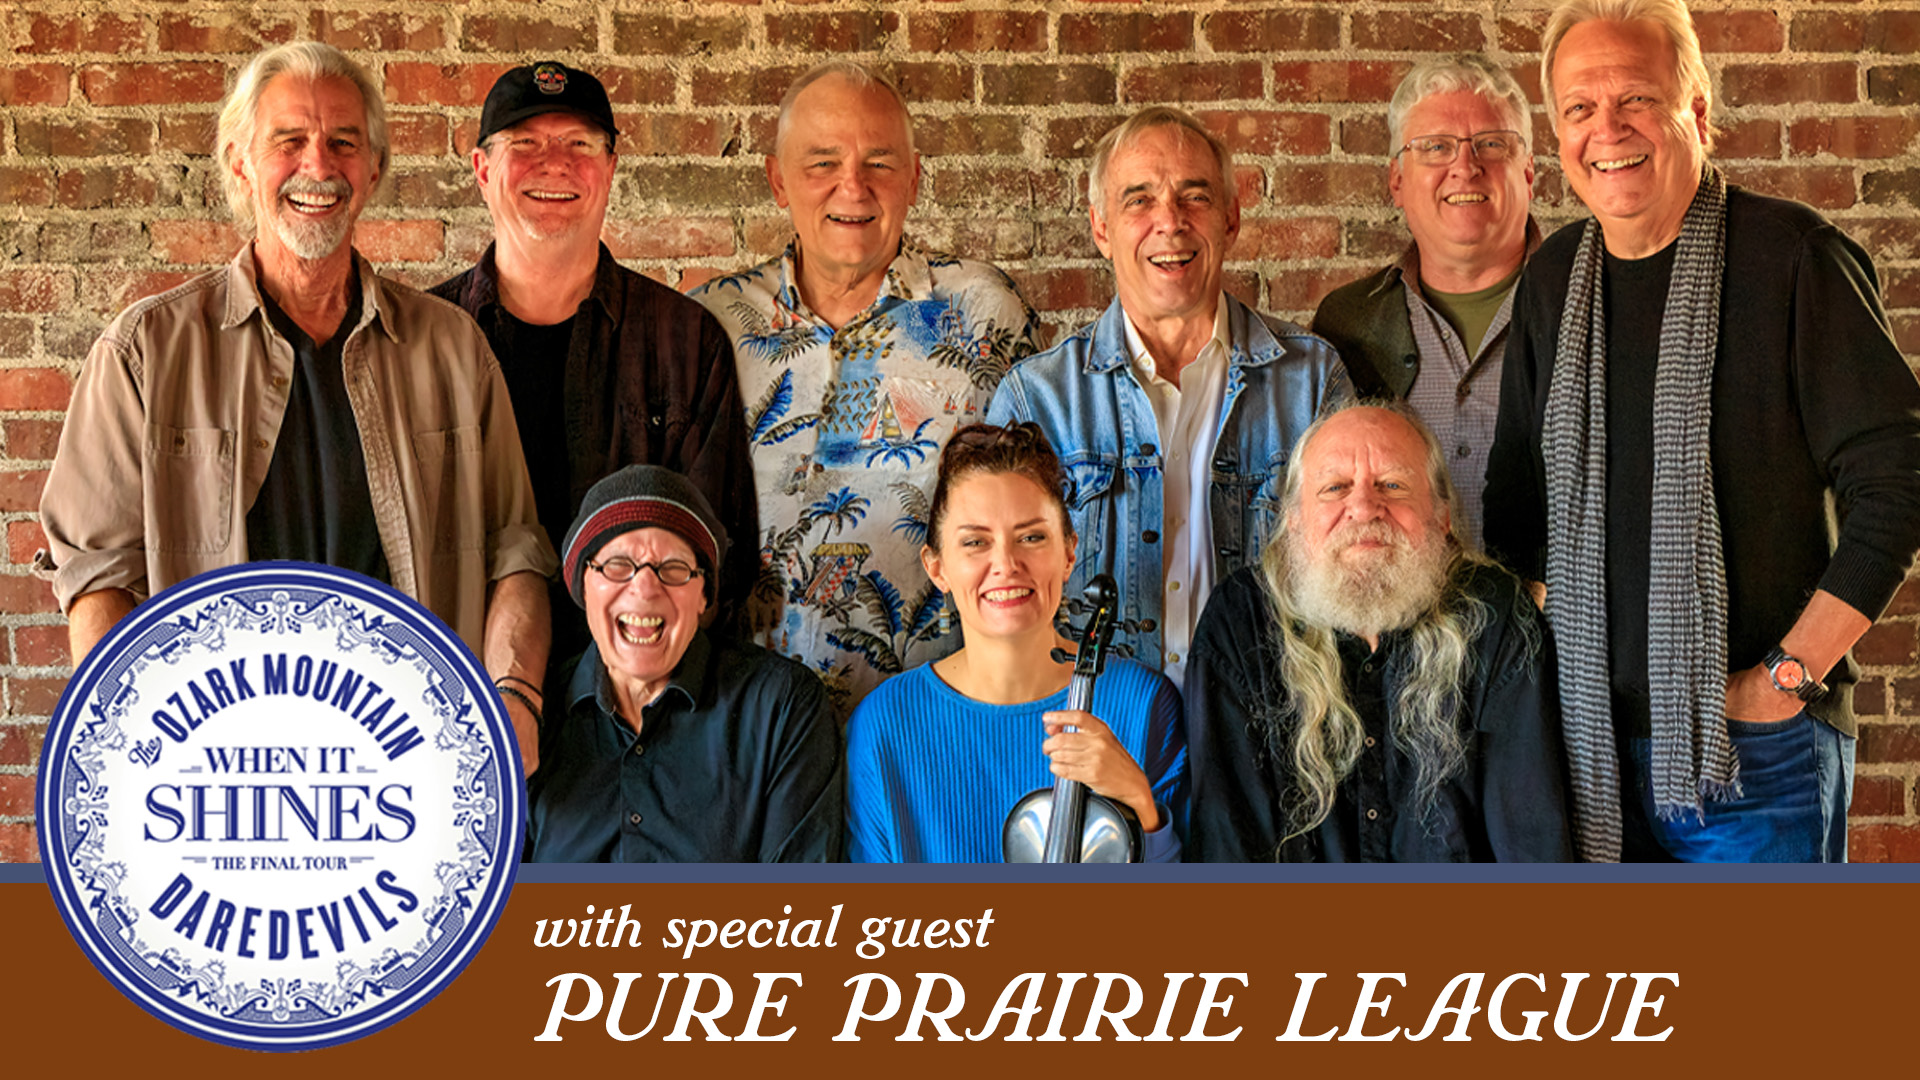 Ozark Mountain Daredevils: The Farewell Tour with special guest Pure Prairie League